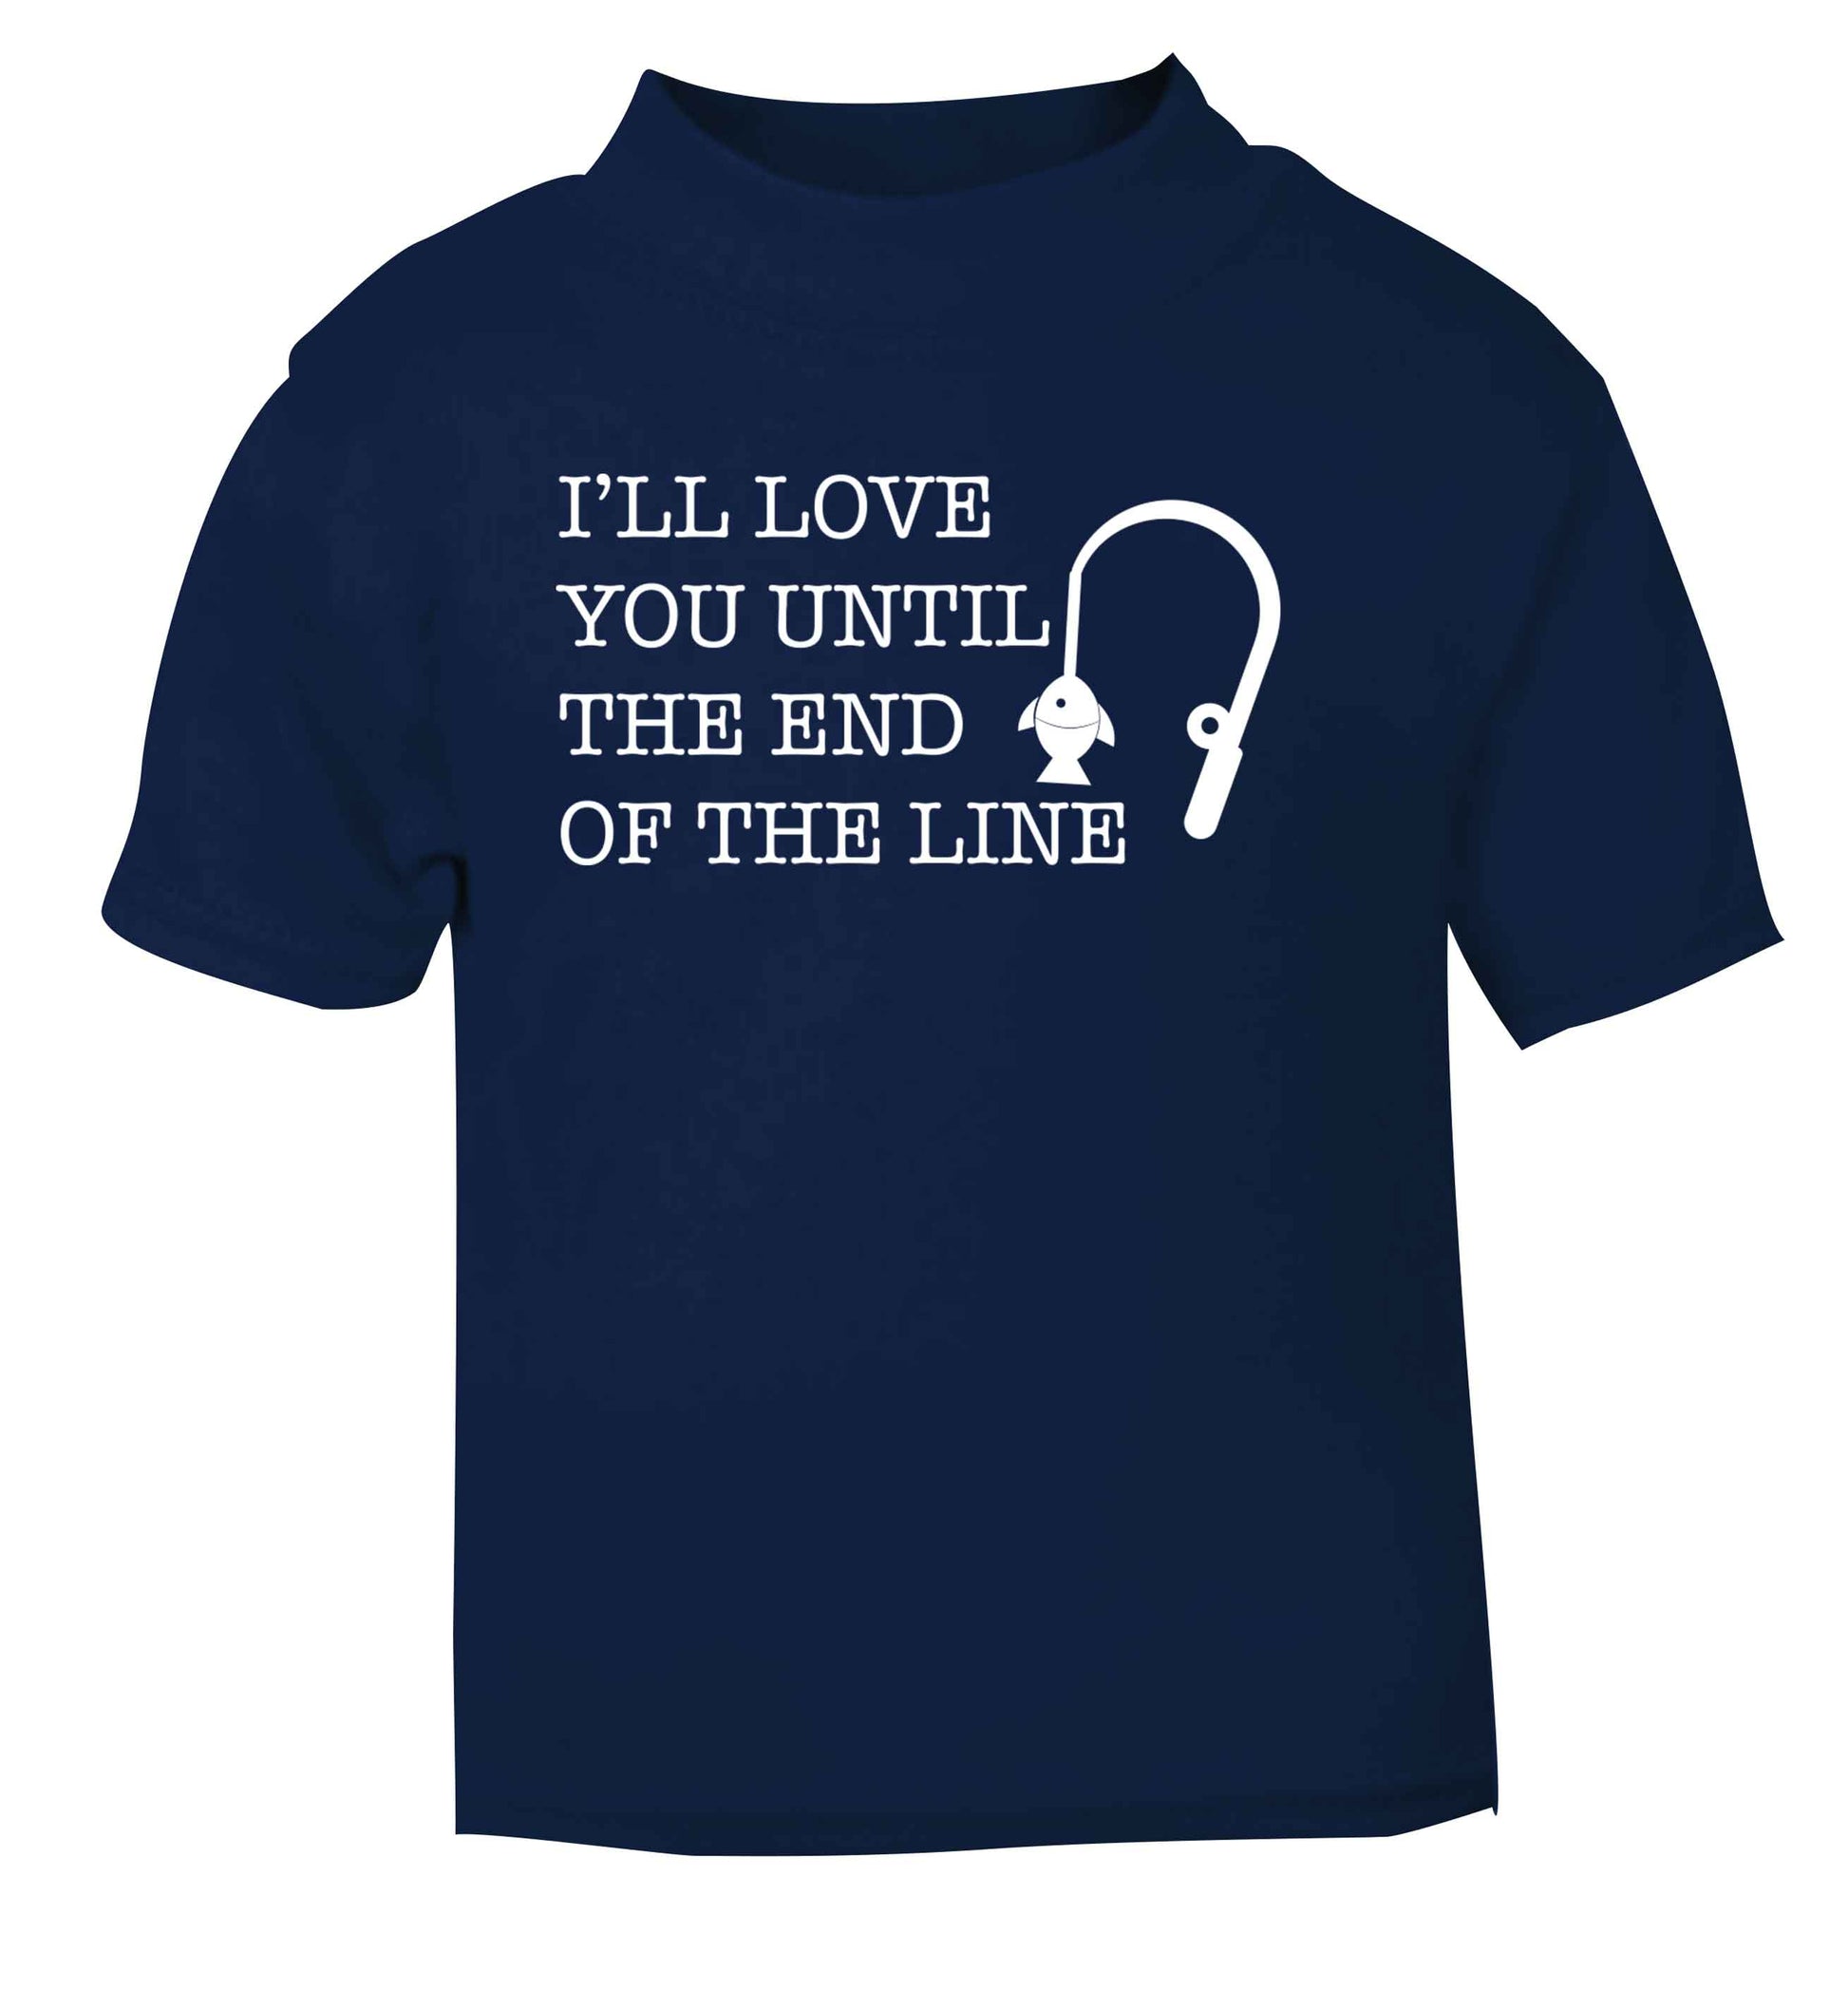 I'll love you until the end of the line navy Baby Toddler Tshirt 2 Years